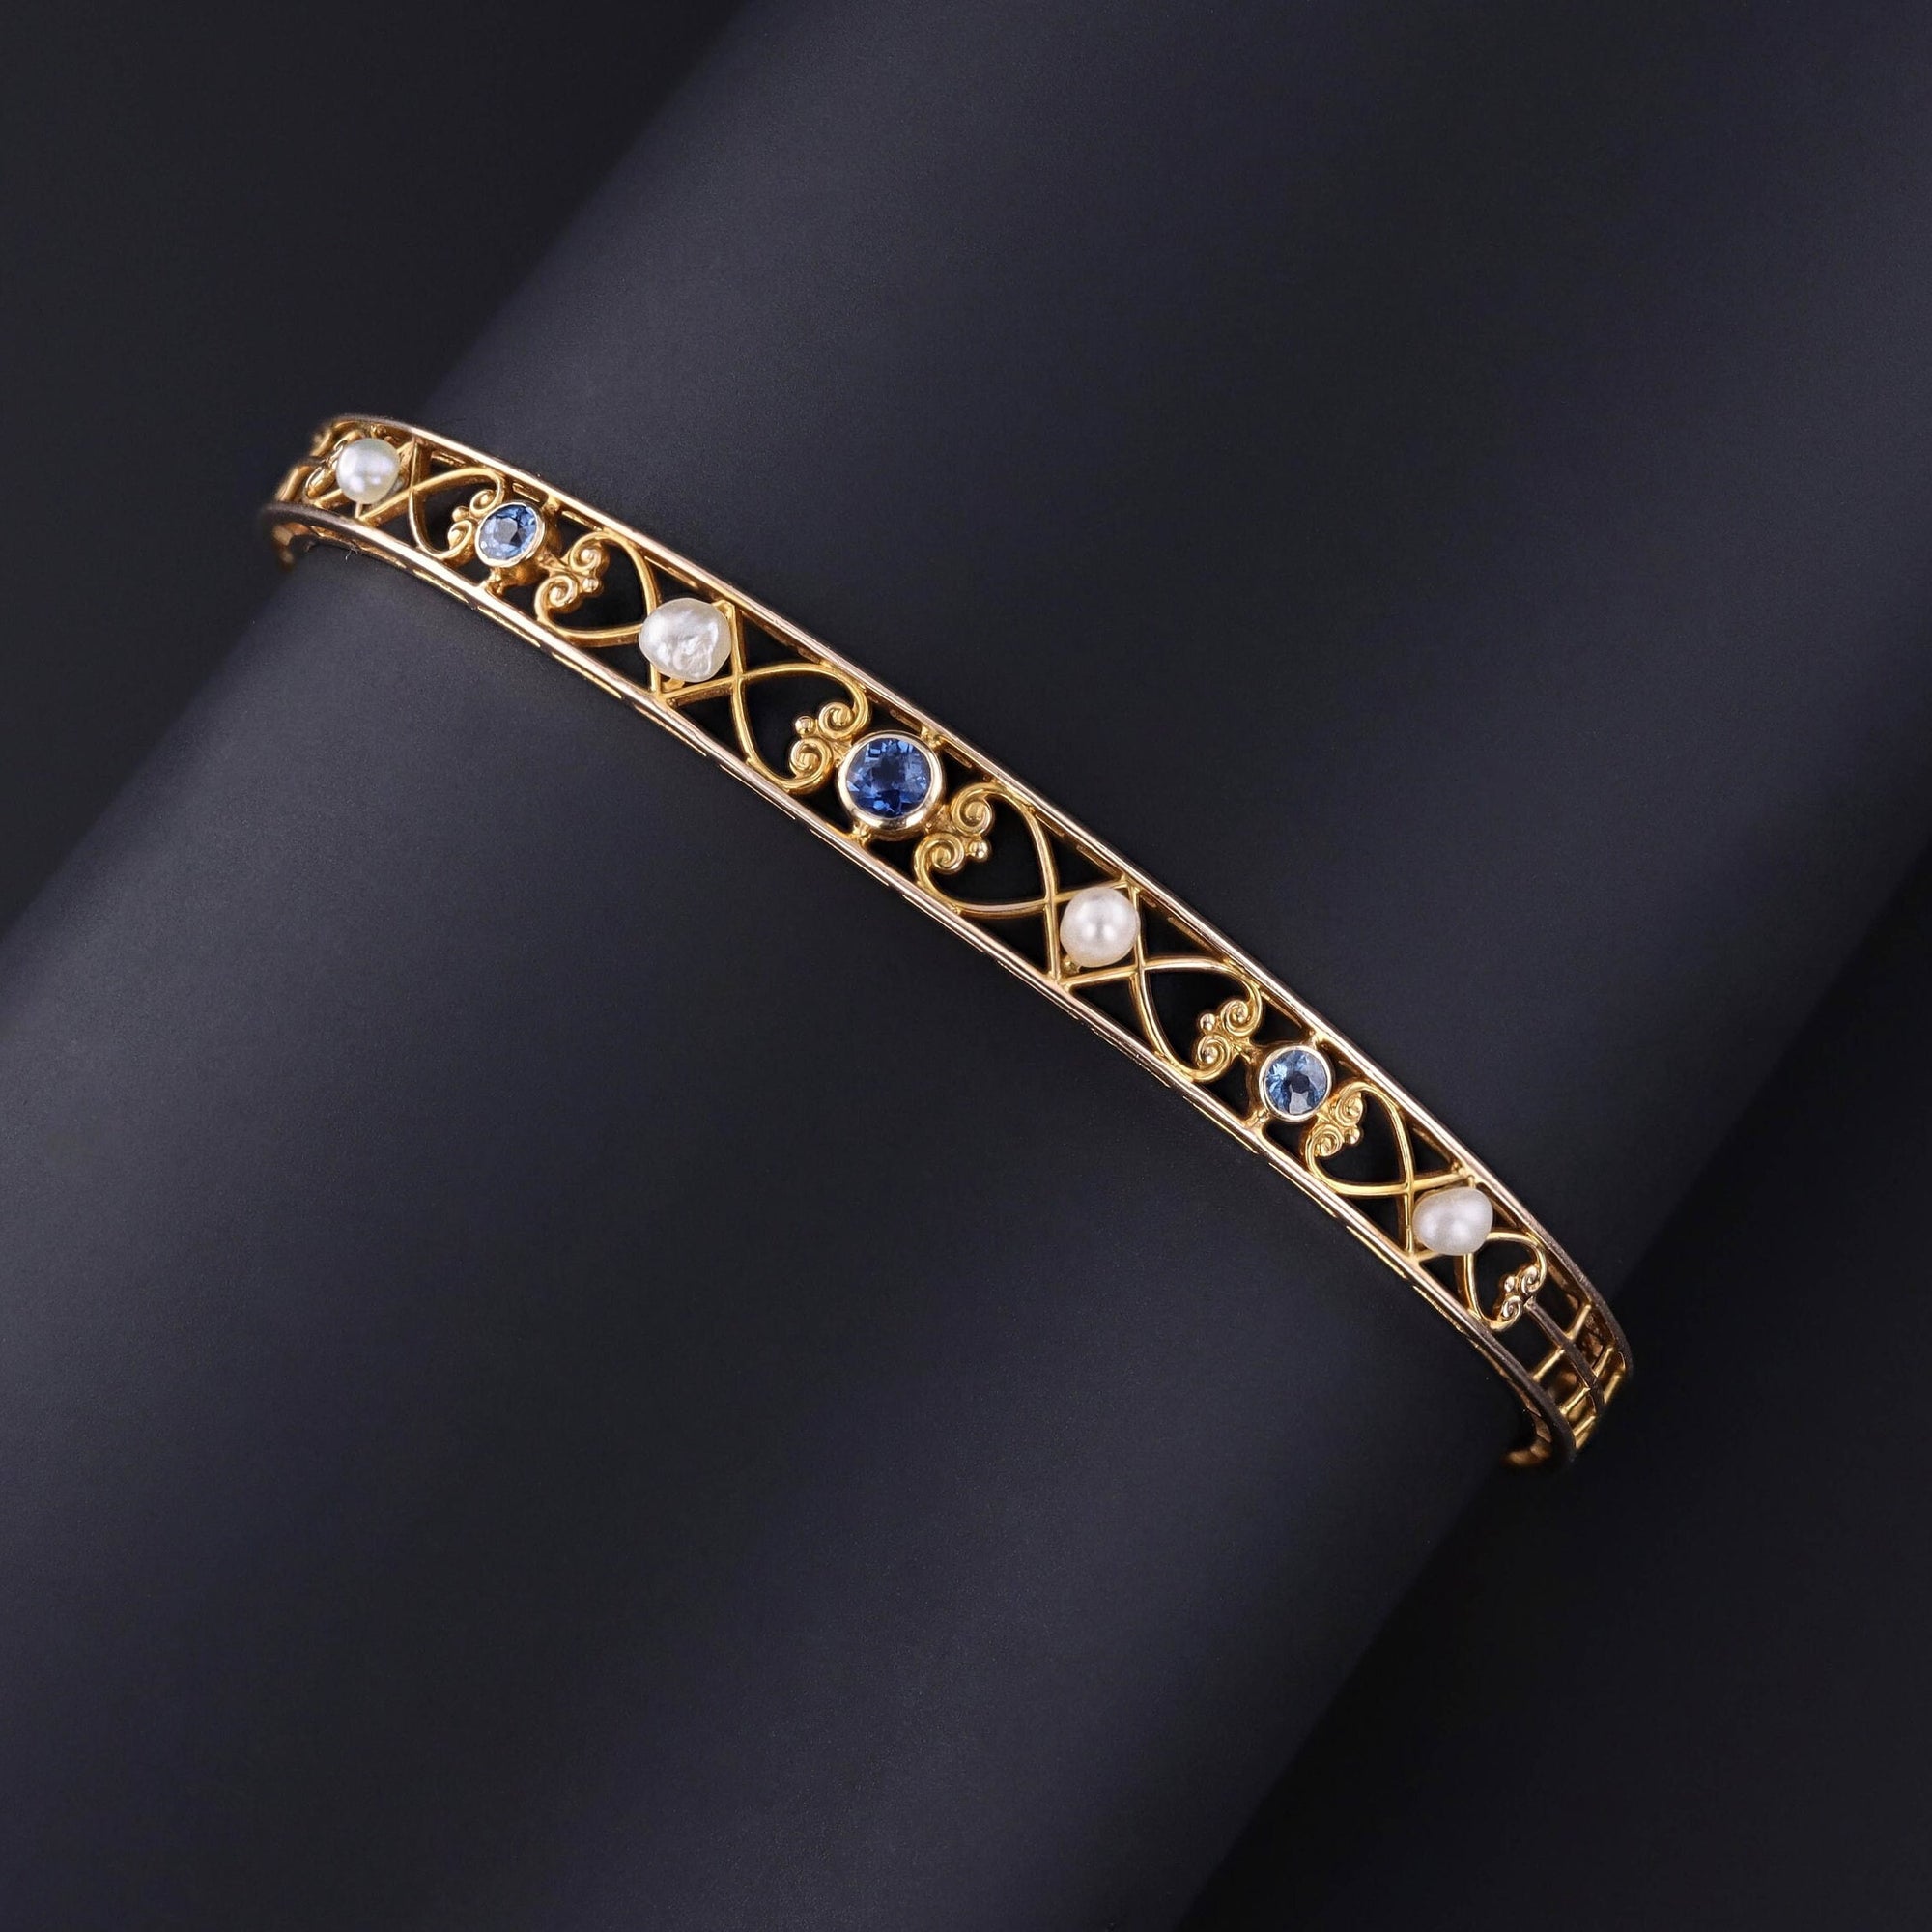 Step into the elegance of the 1920s with this antique bracelet featuring sapphires and pearls intricately set in 14k gold filigree. The inside bears the maker&#39;s mark for the renowned Alling & Co. of Newark, NJ.